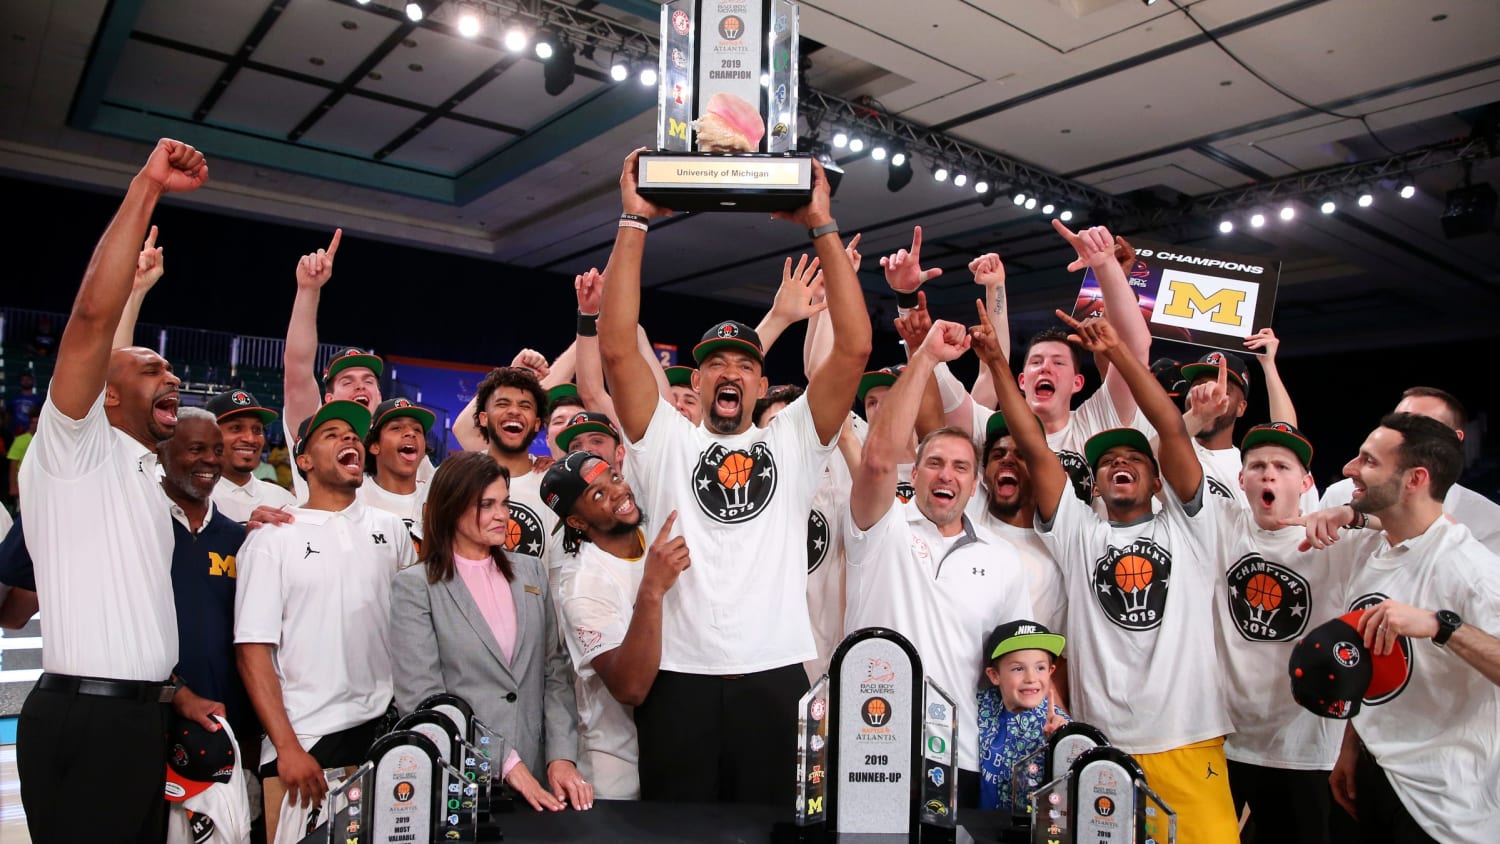 Juwan Howard has Michigan looking elite after run to title in Bahamas. Here's how he did it.